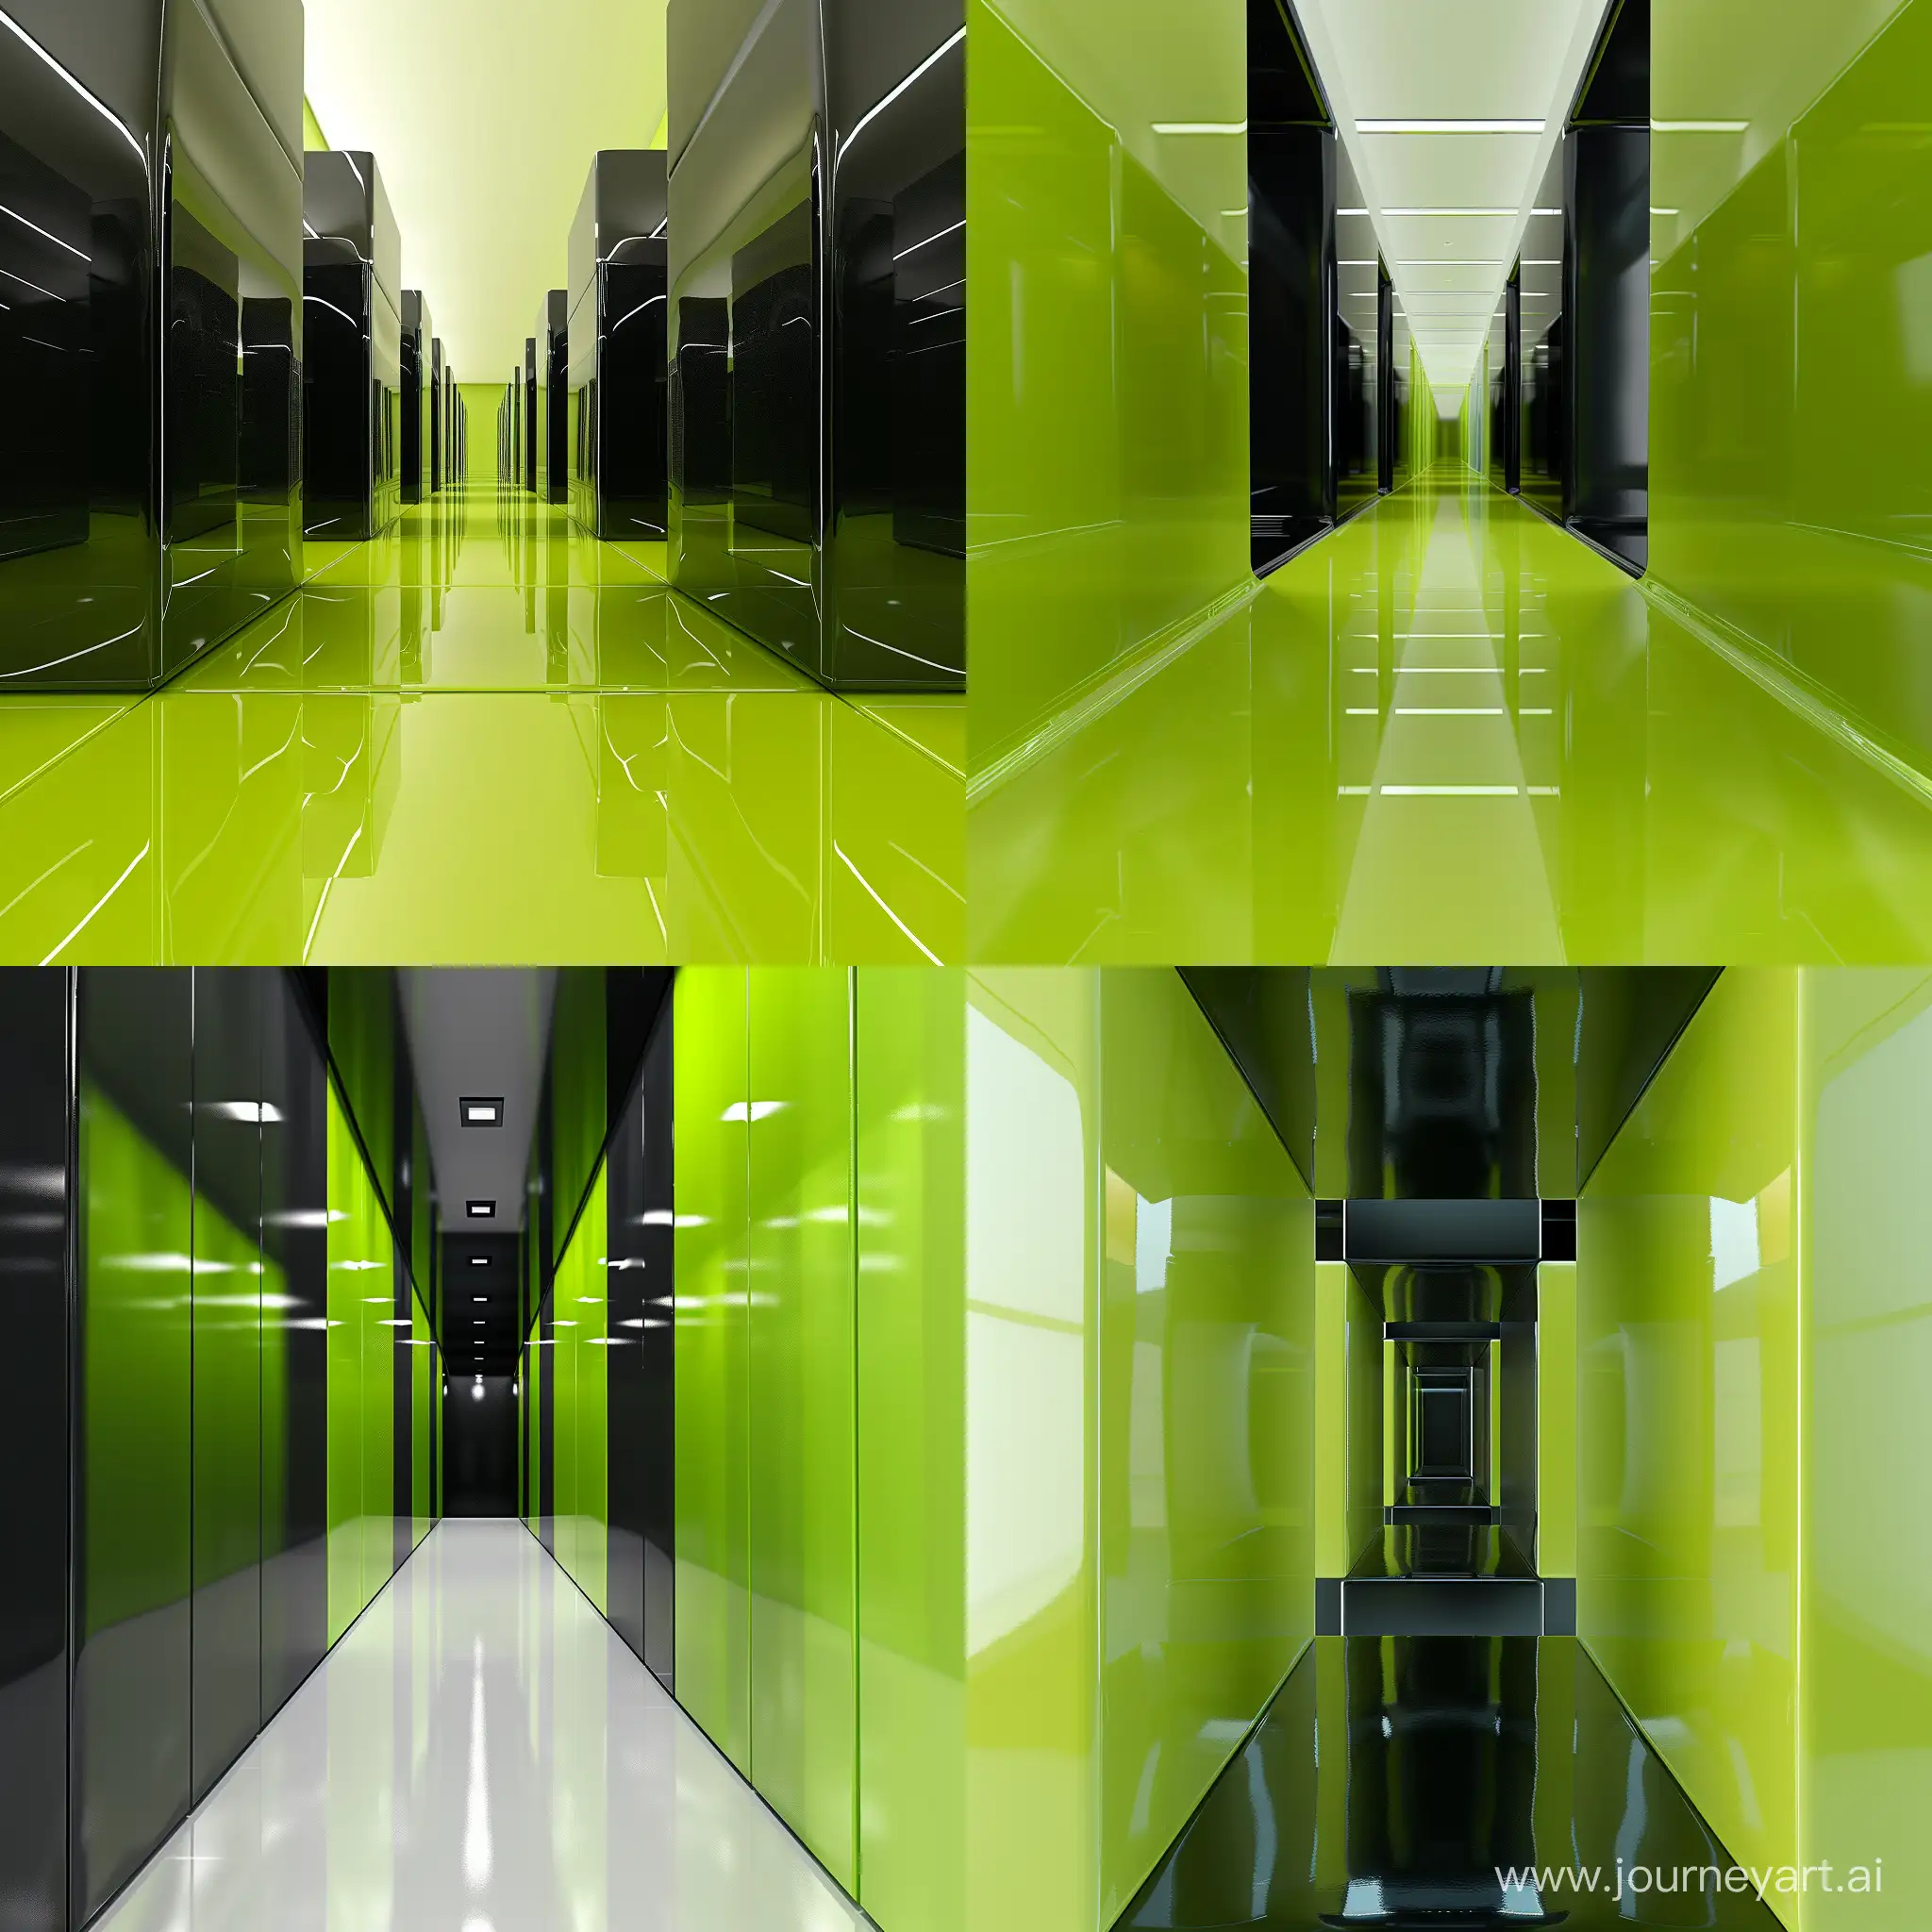 Two glossy painted cubes of black and lime green,camera is looking up from the bottom of the aisle of the cubes, photo realistic, high resolution, unreal quality